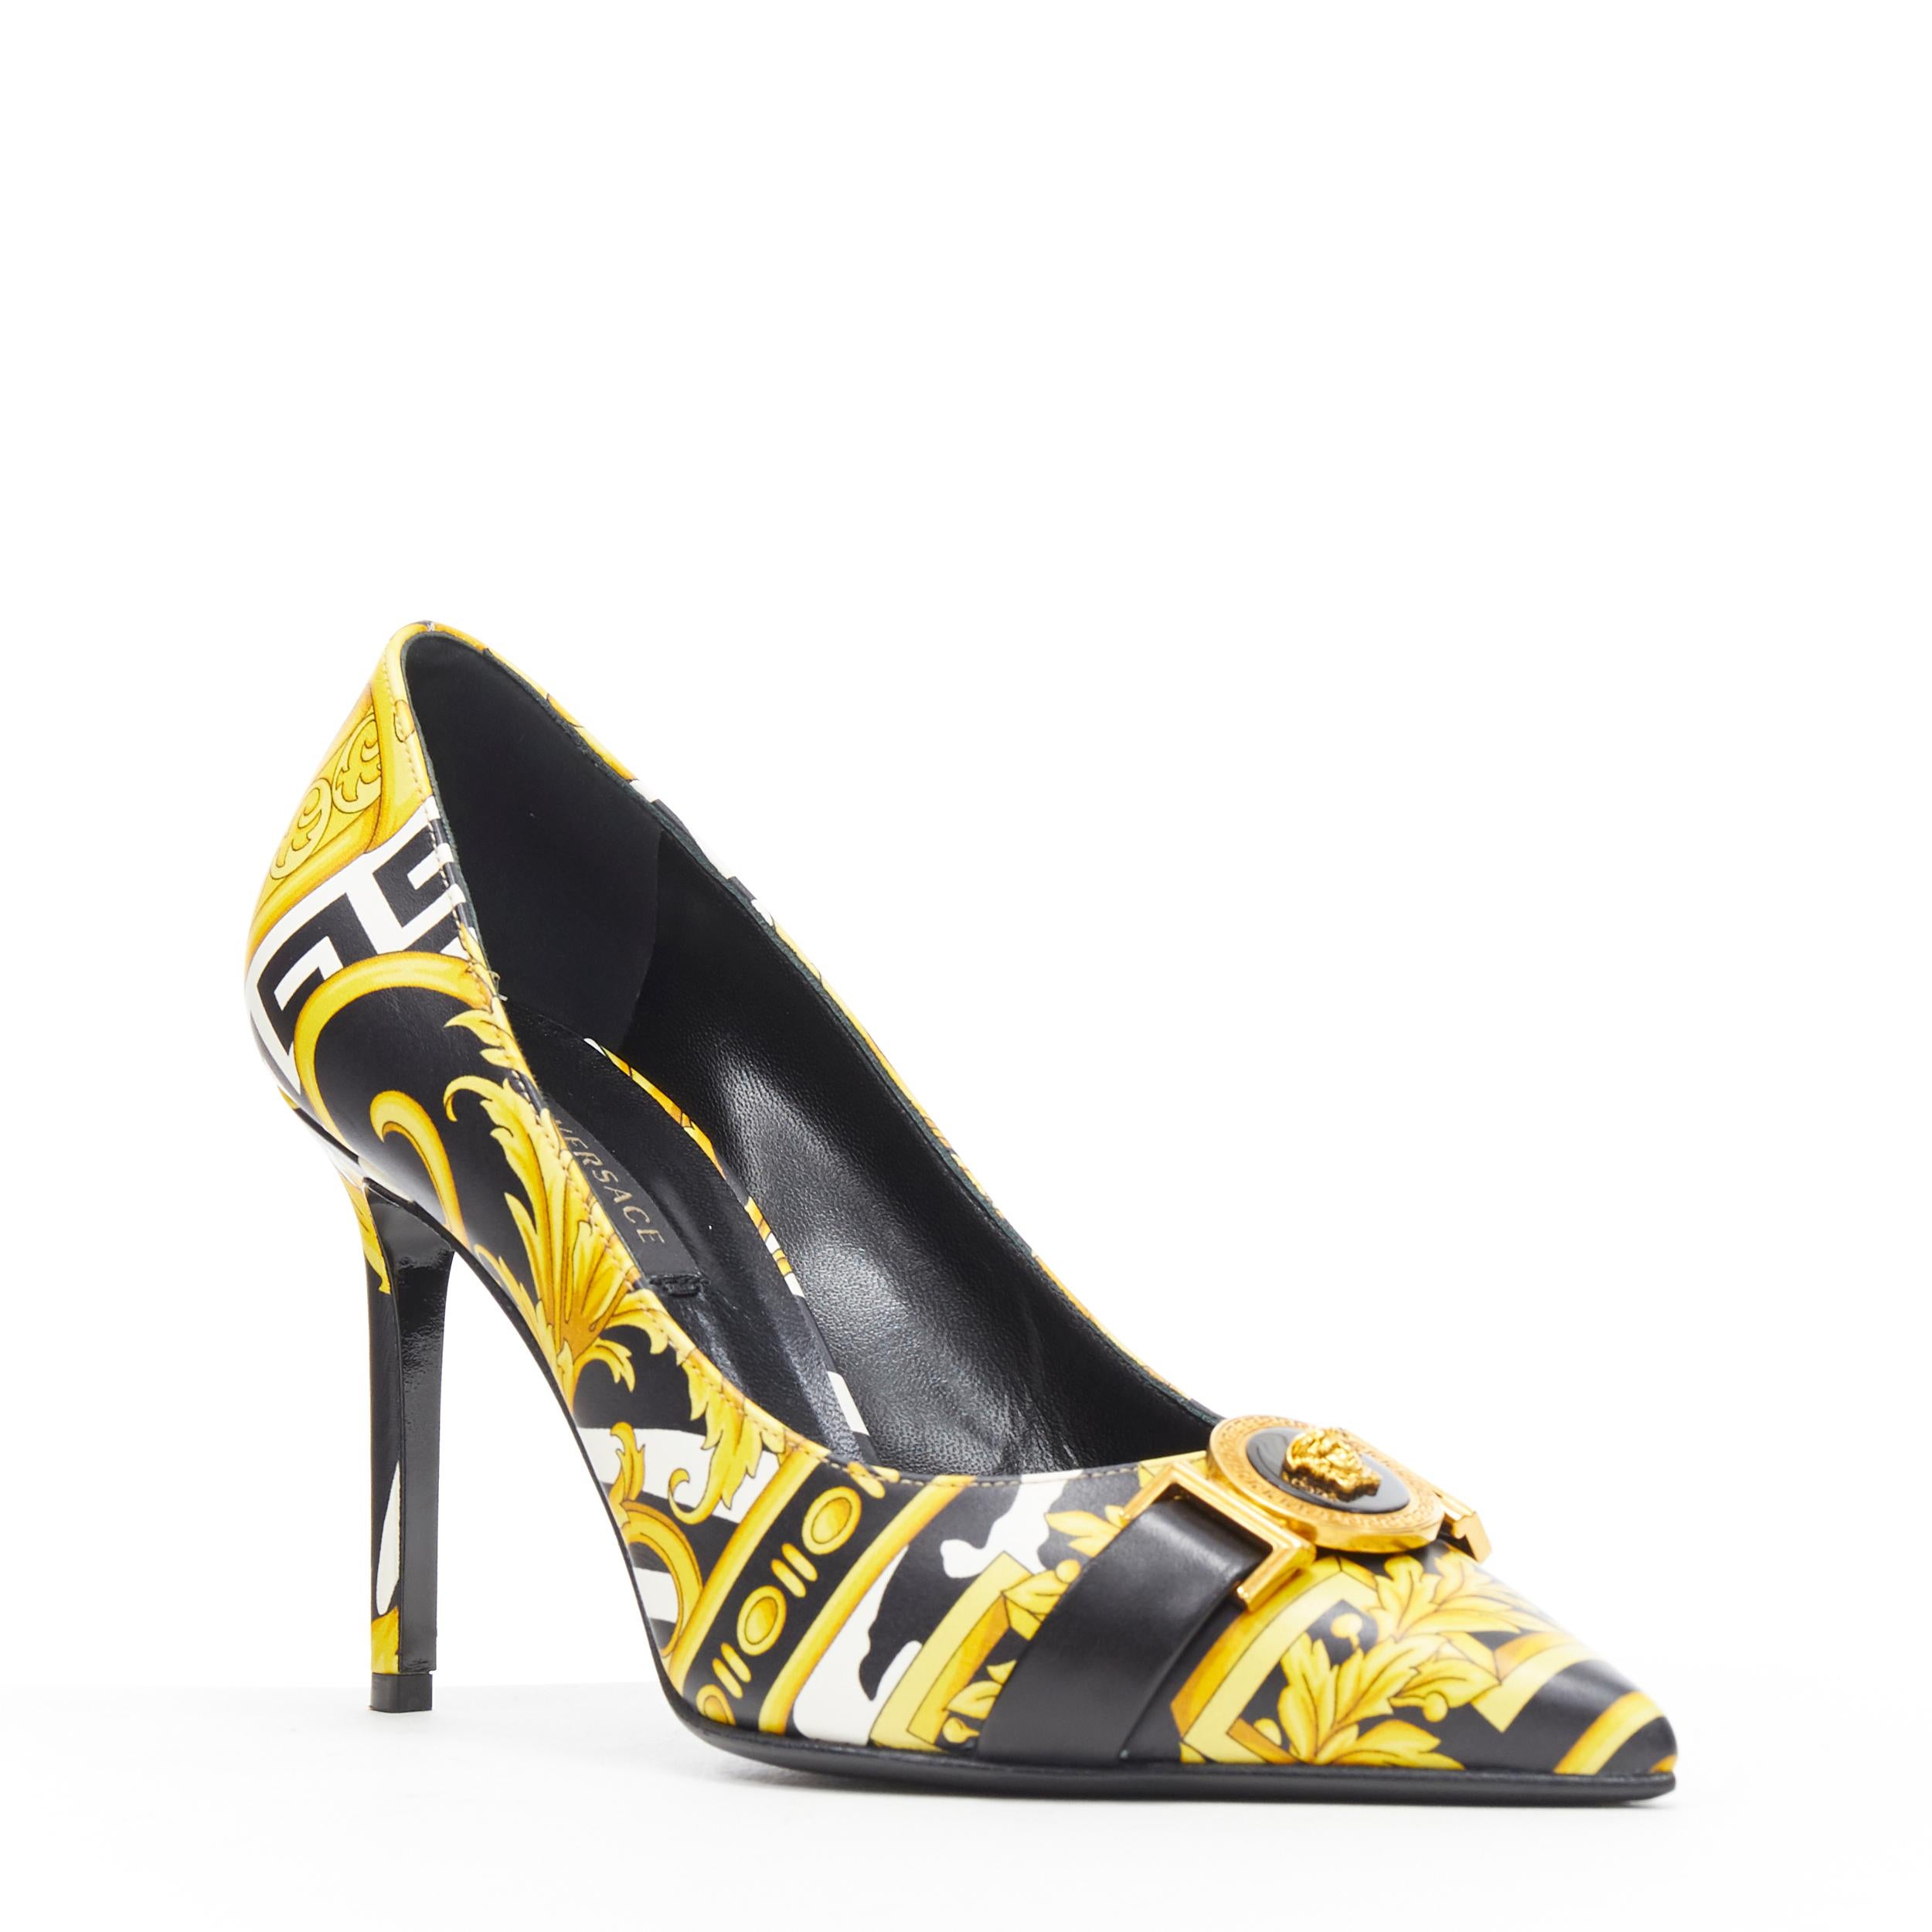 new VERSACE Savage Wild Barocco gold white Medusa strap pointy leather heel EU40
Brand: Versace
Designer: Donatella Versace
Collection: 2019
Model Name / Style: Baroque pump
Material: Leather
Color: Gold, black
Pattern: Floral
Extra Detail: Savage